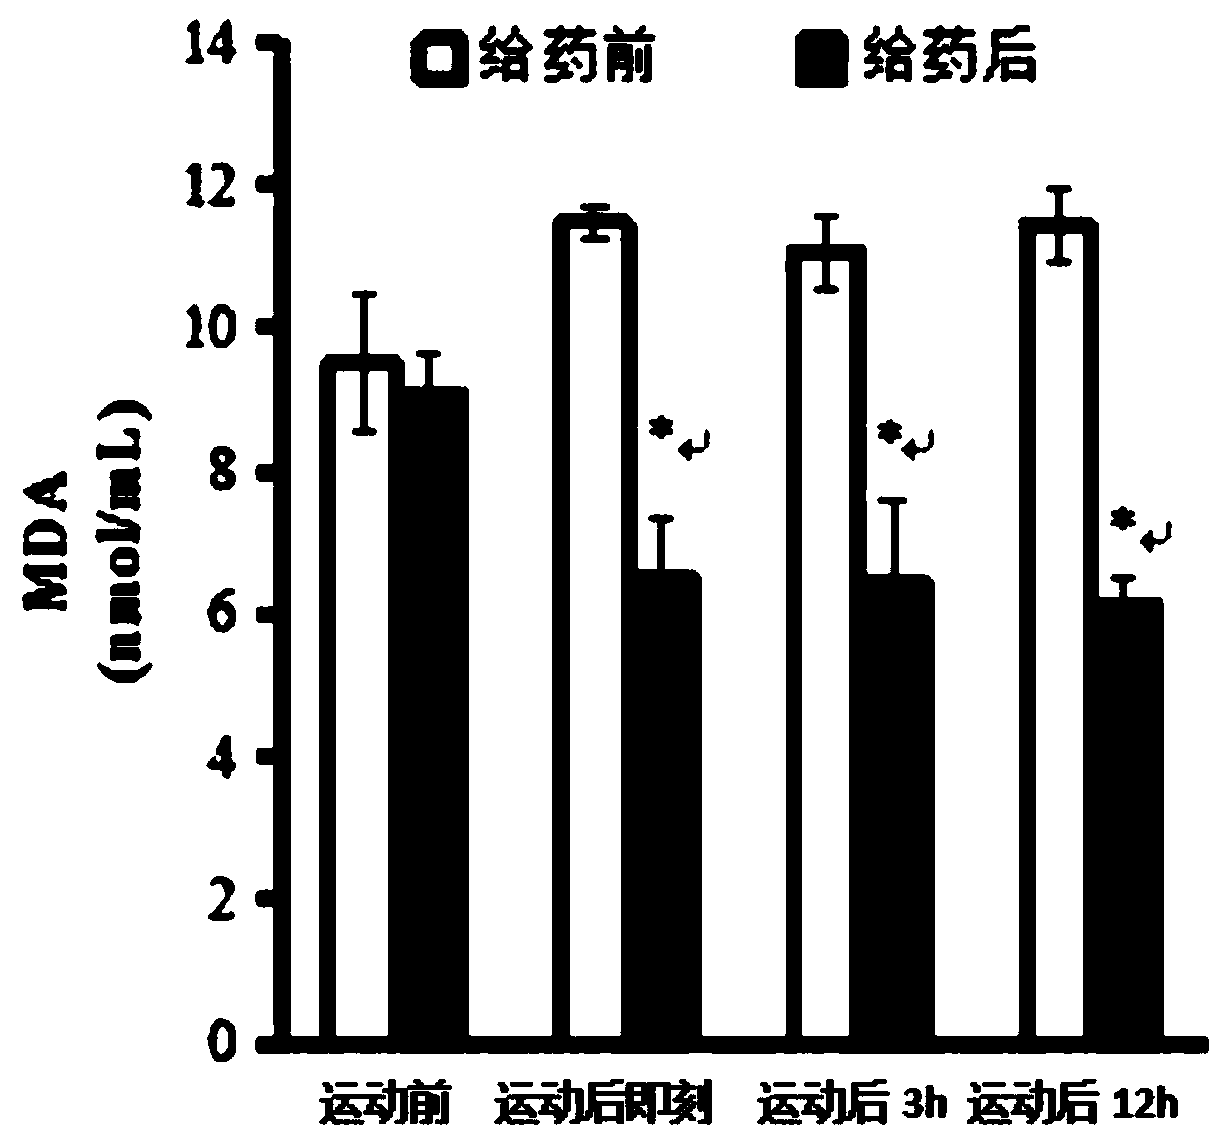 Prescription used for preparing Chinese herbal medicine capable of alleviating racehorse muscular soreness symptom, and application of prescription